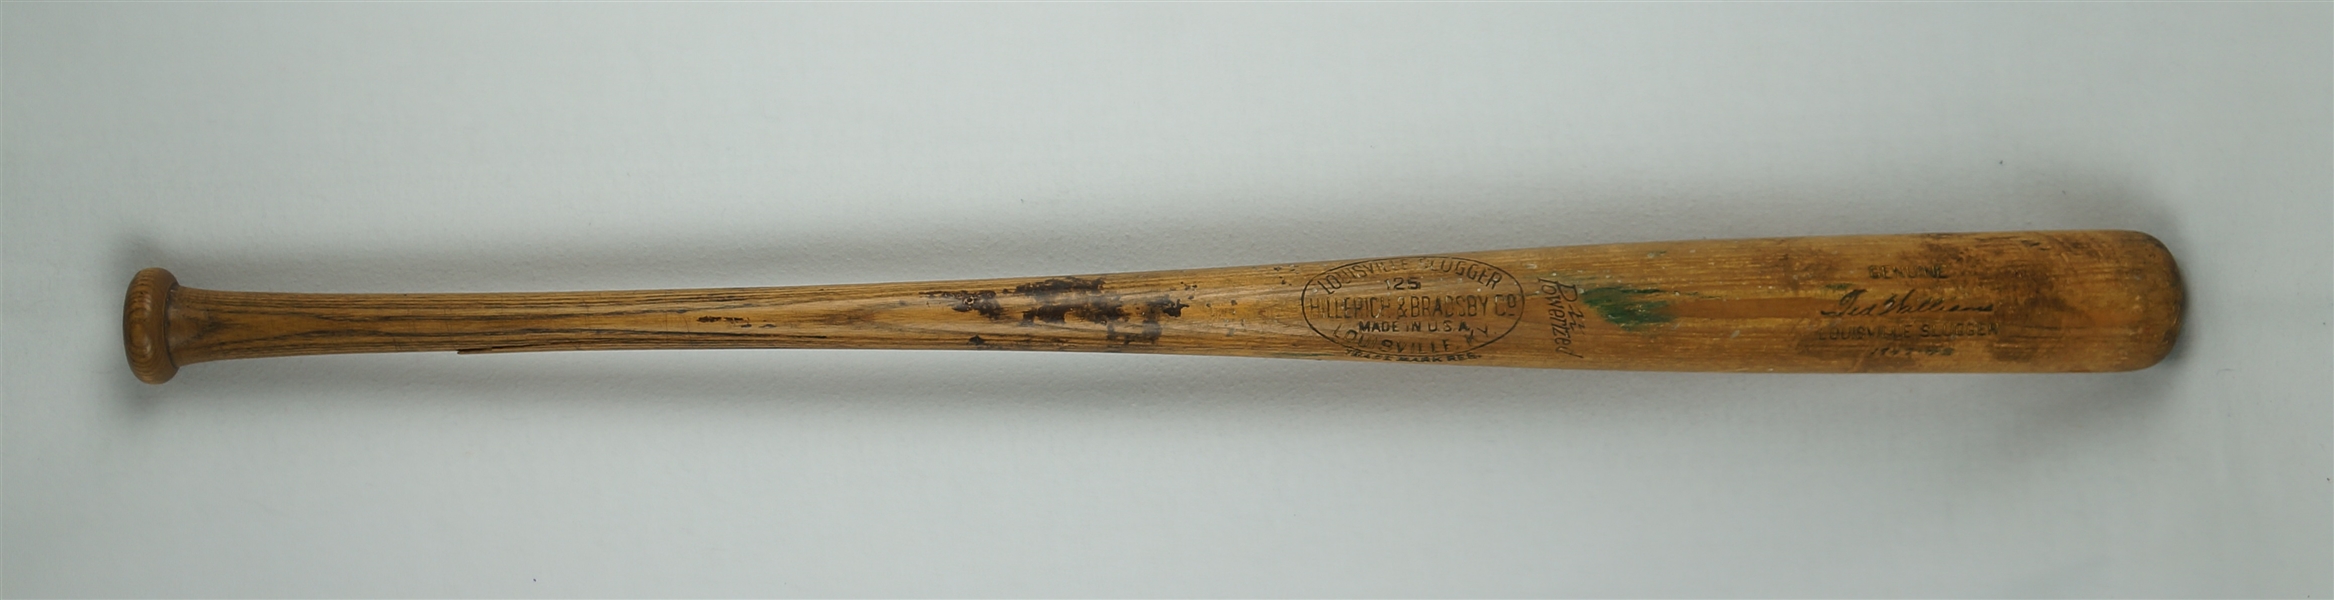 Ted Williams 1947-48 Boston Red Sox Game Used Bat Graded MEARS A7 *Teds Triple Crown Season*